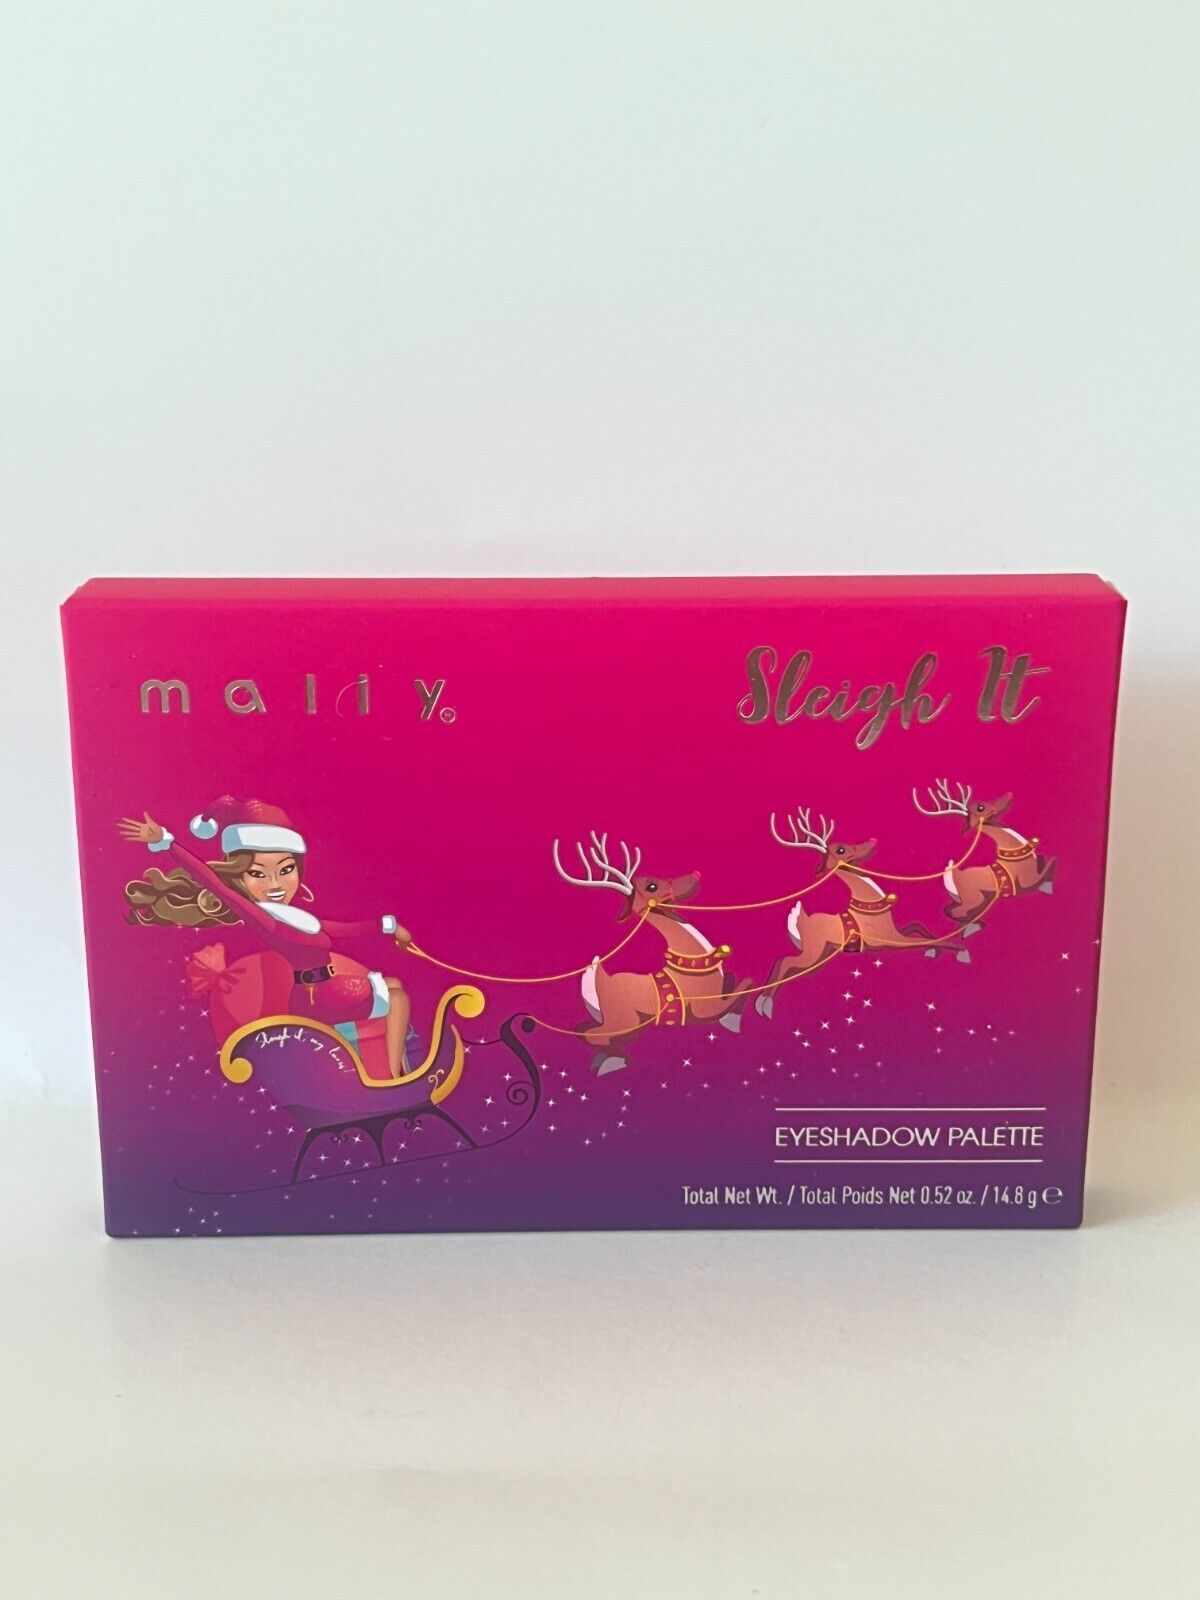 MALLY - SLEIGH IT -  EYESHADOW PALETTE - 8 COLORS - 0.52 OZ - Boxed - $14.00